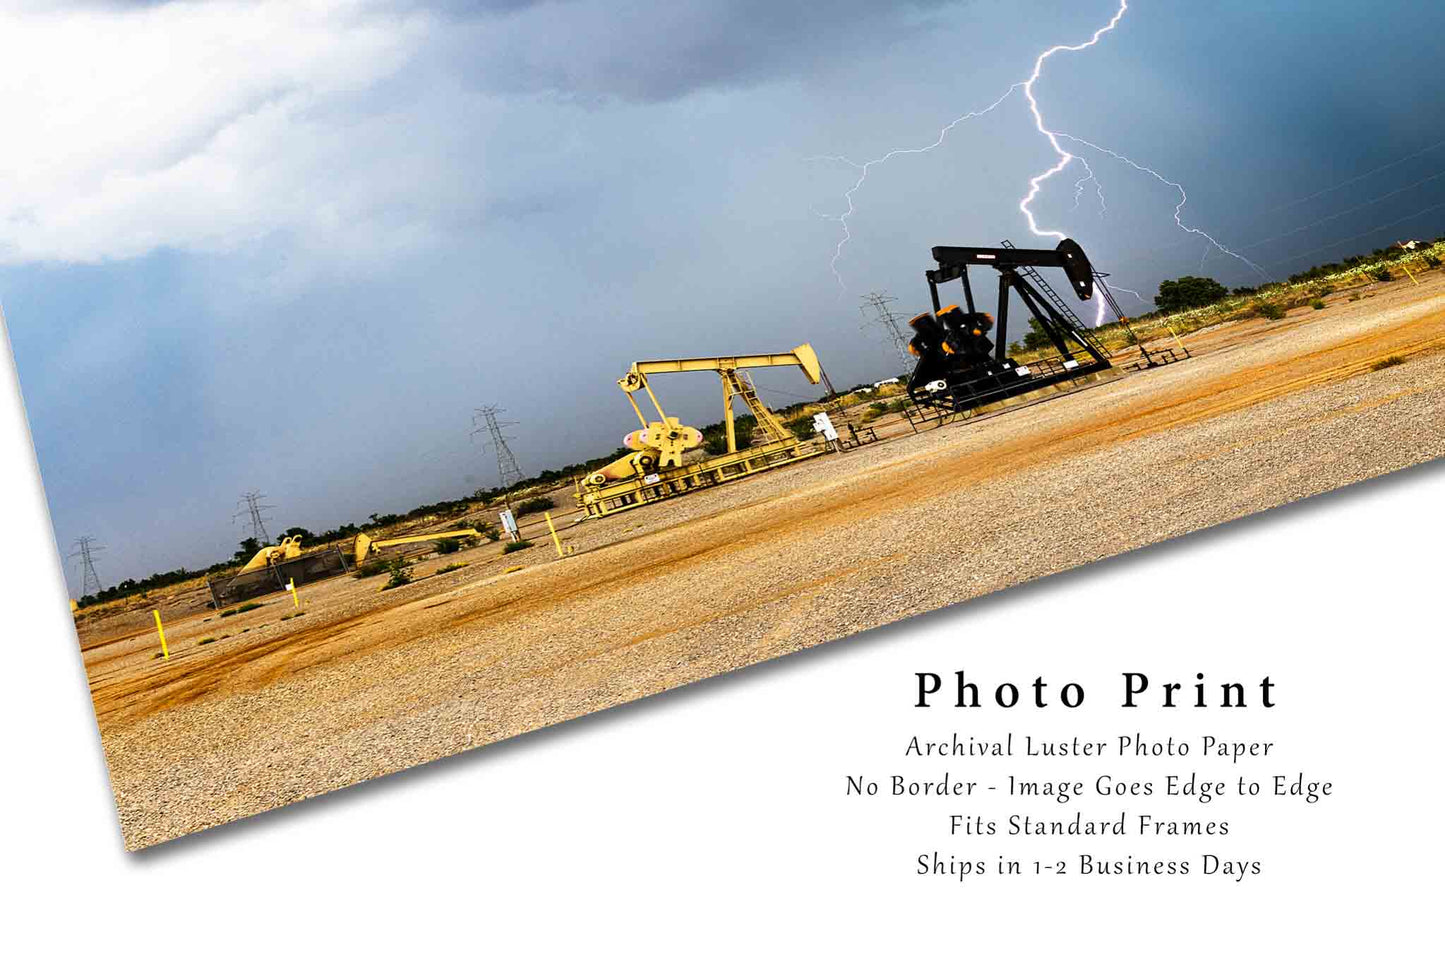 Storm Photography Print (Not Framed) Picture of Lightning Bolt and Pump Jacks on Stormy Day in Oklahoma Oilfield Wall Art Oil and Gas Decor